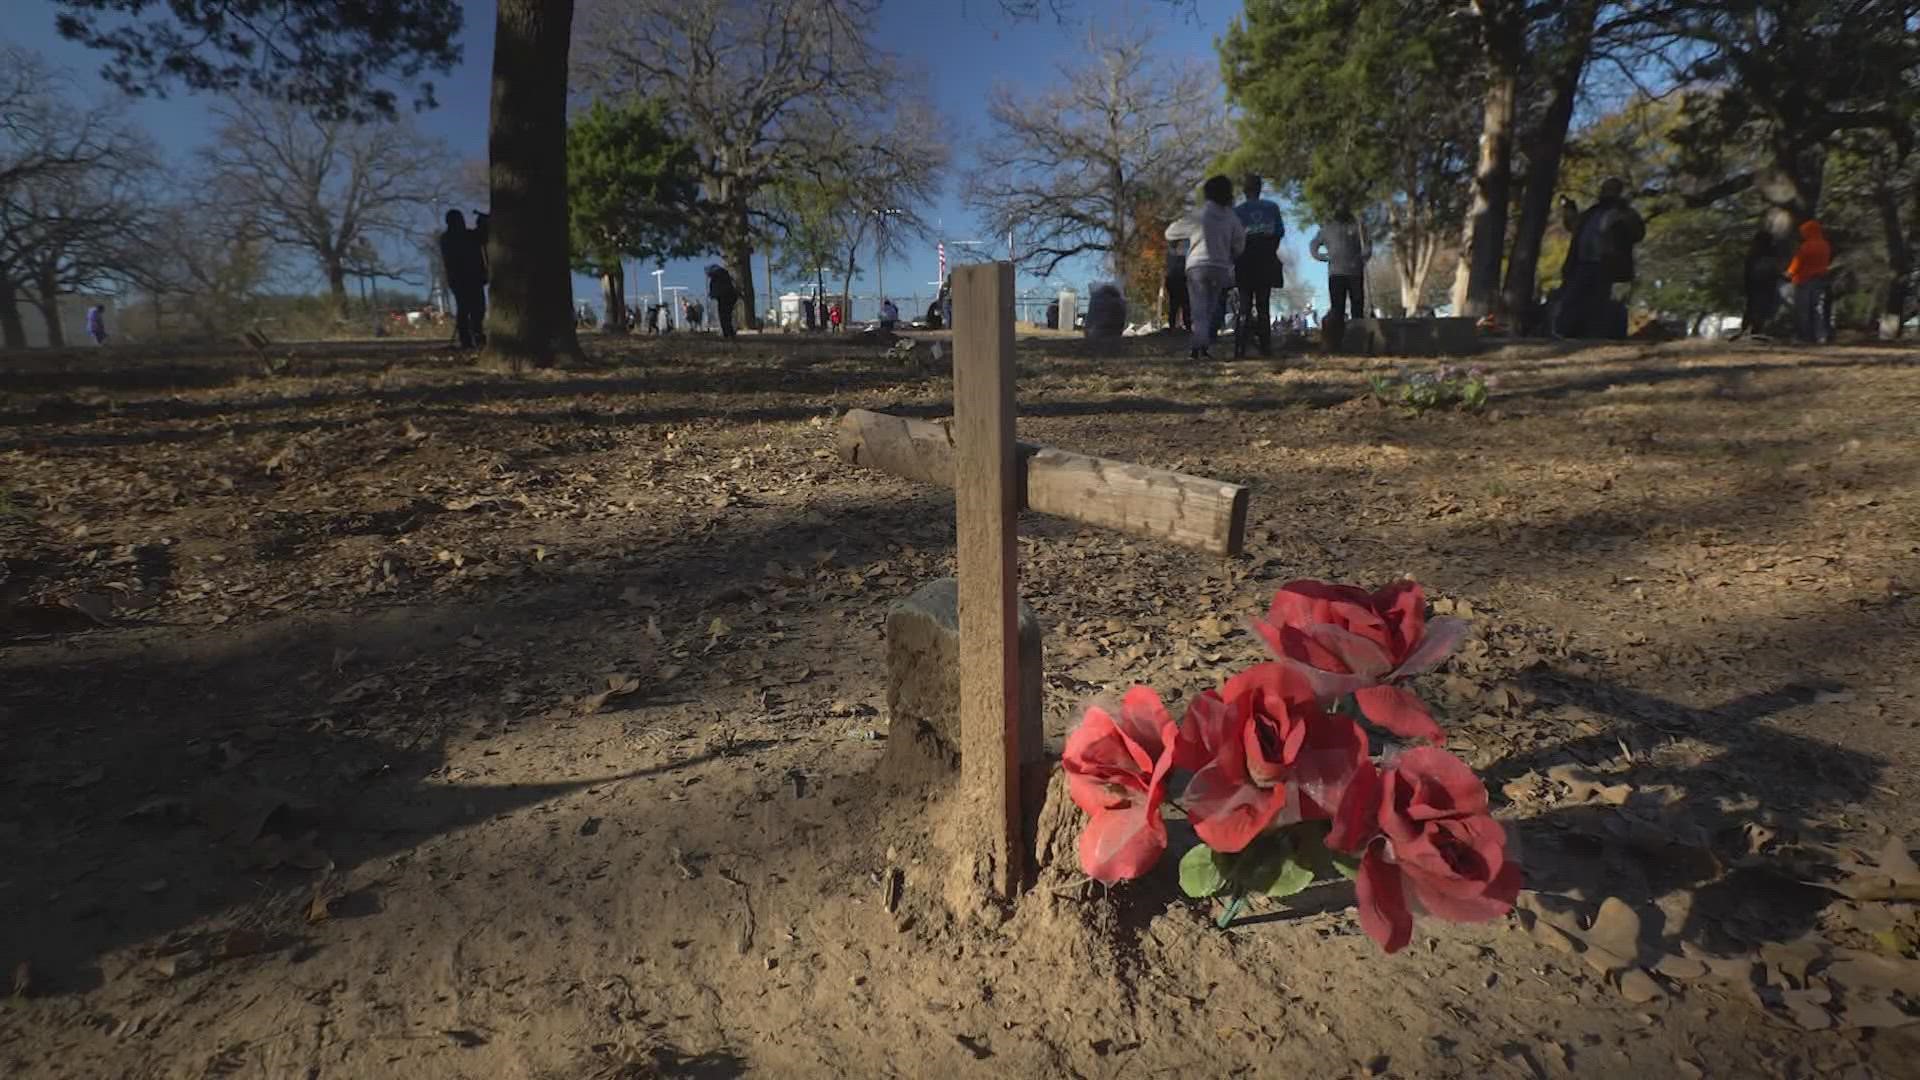 Volunteers arrived in Lewisville early Monday to commemorate Martin Luther King Jr. Day by cleaning and restoring a Denton County African American cemetery.